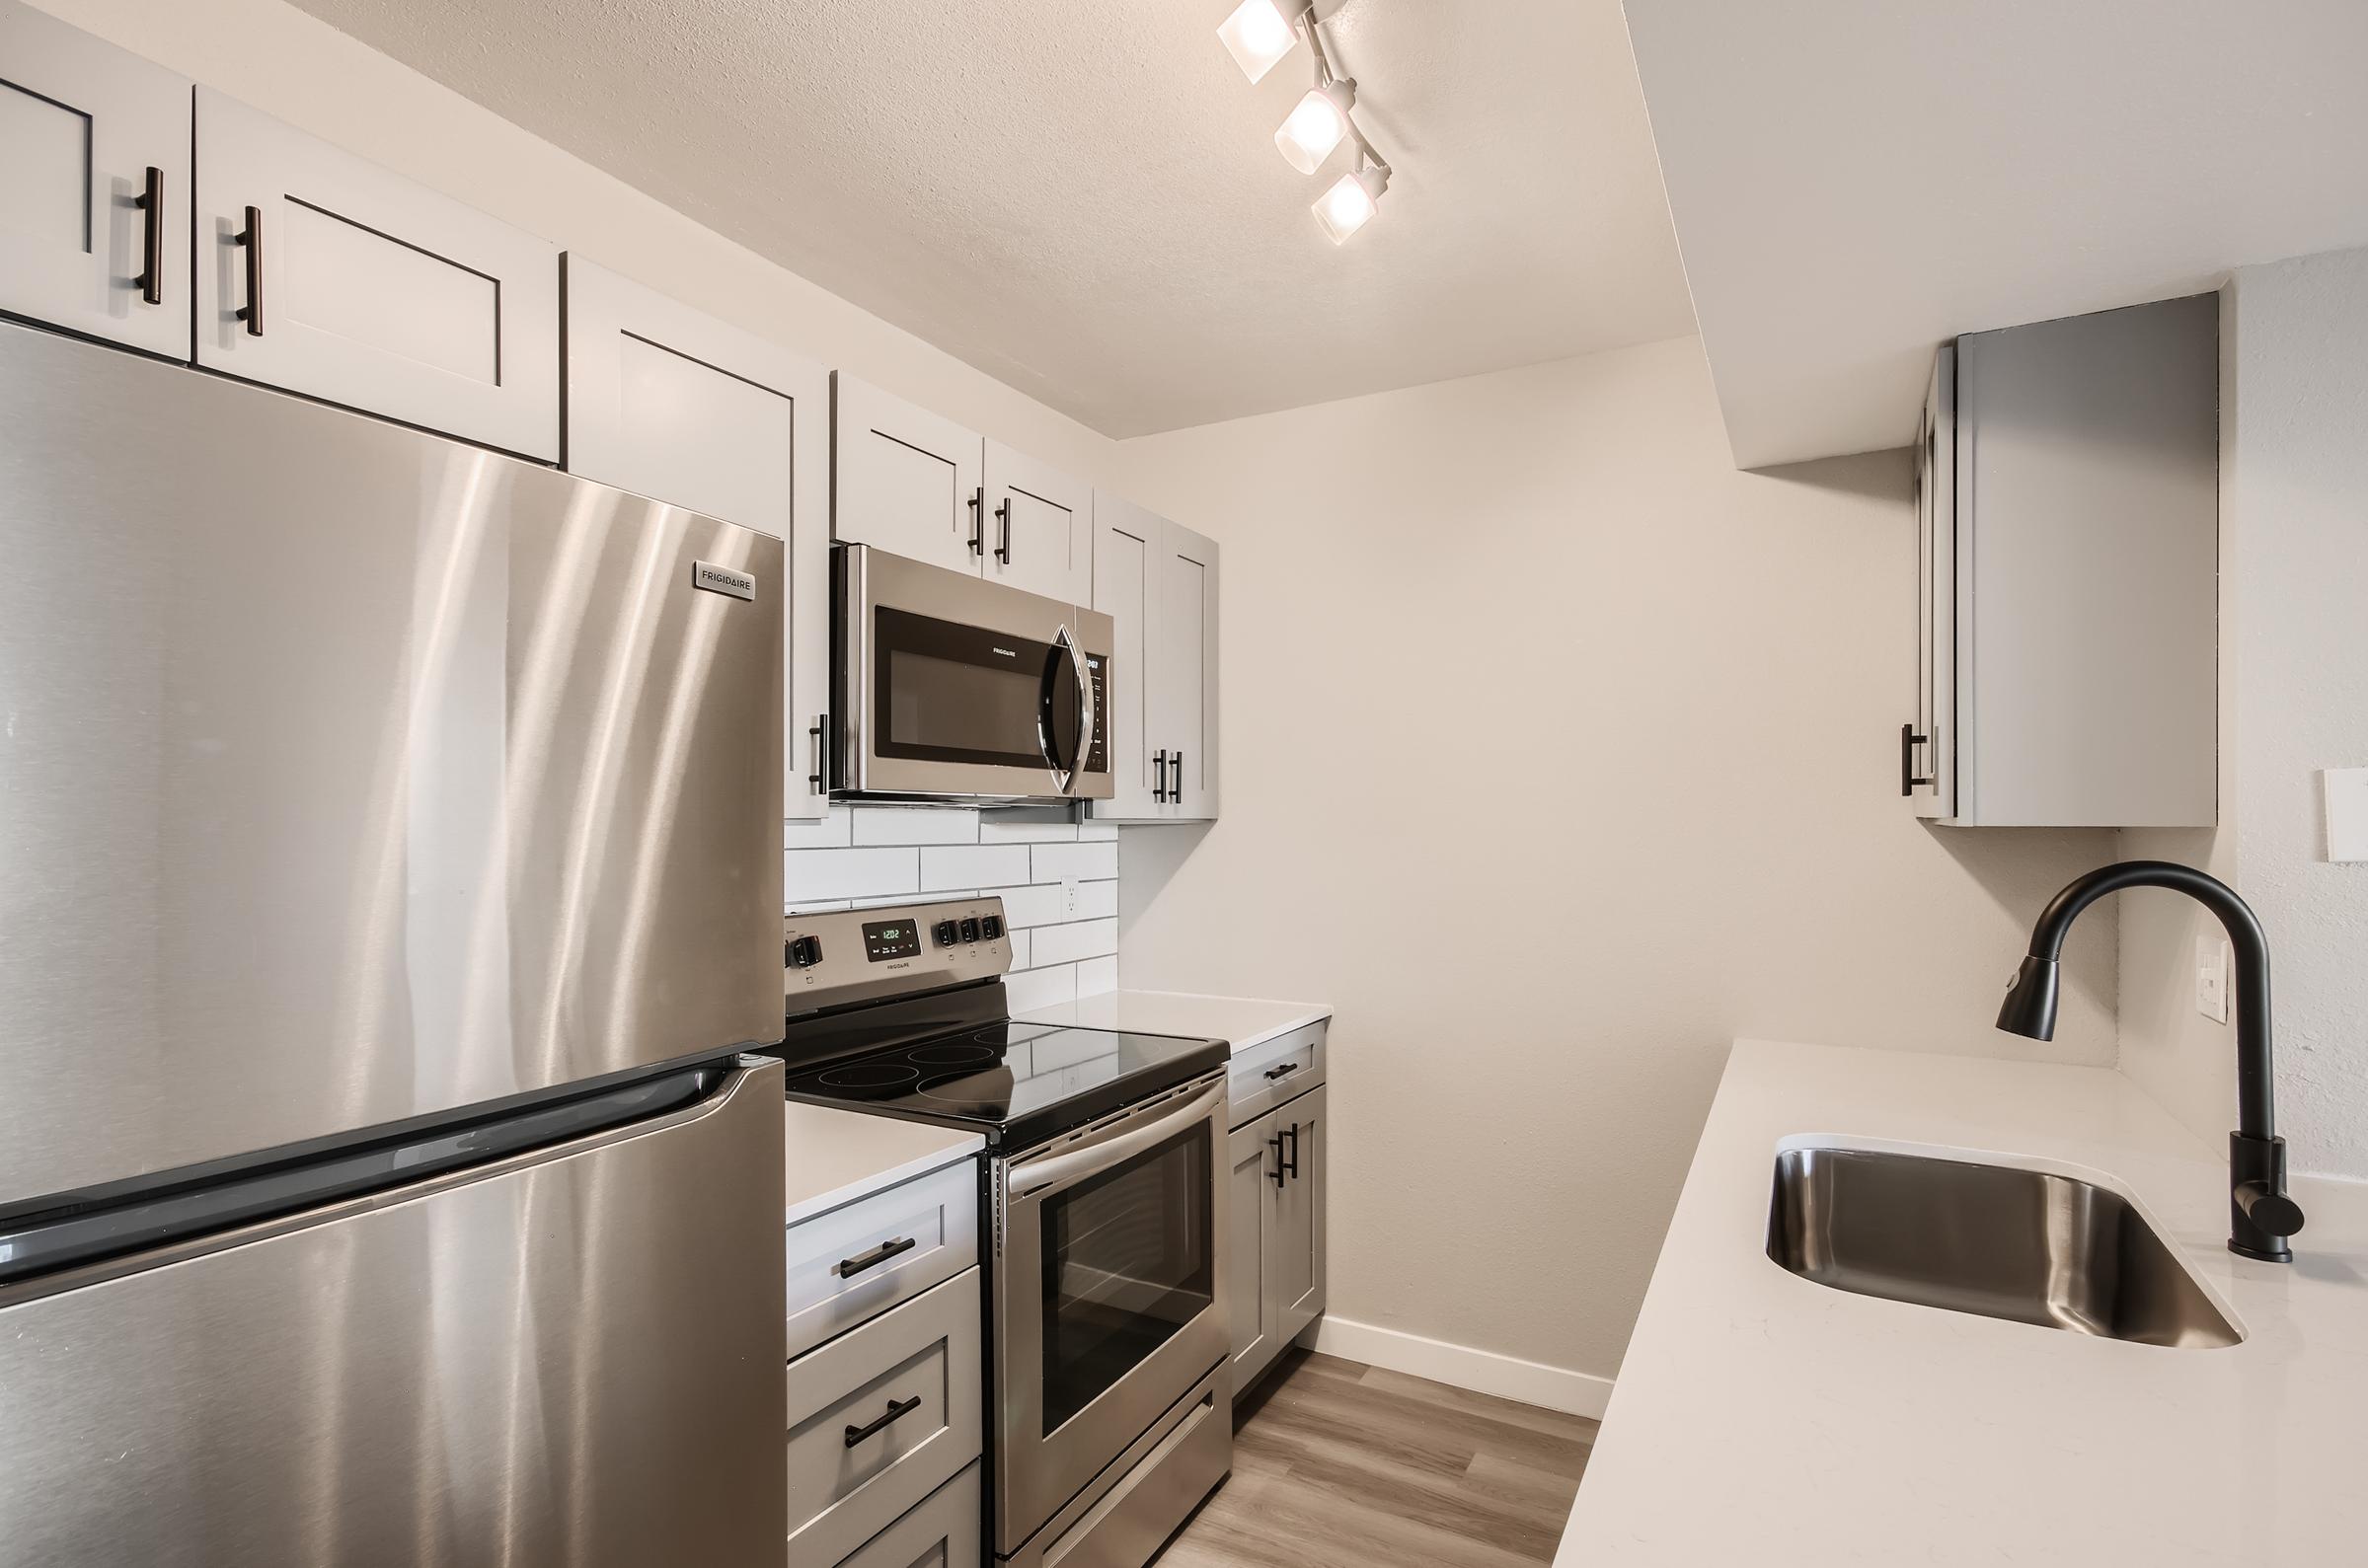 A remodeled galley kitchen with white cabinets and stainless steel appliances at Rise on McClintock.